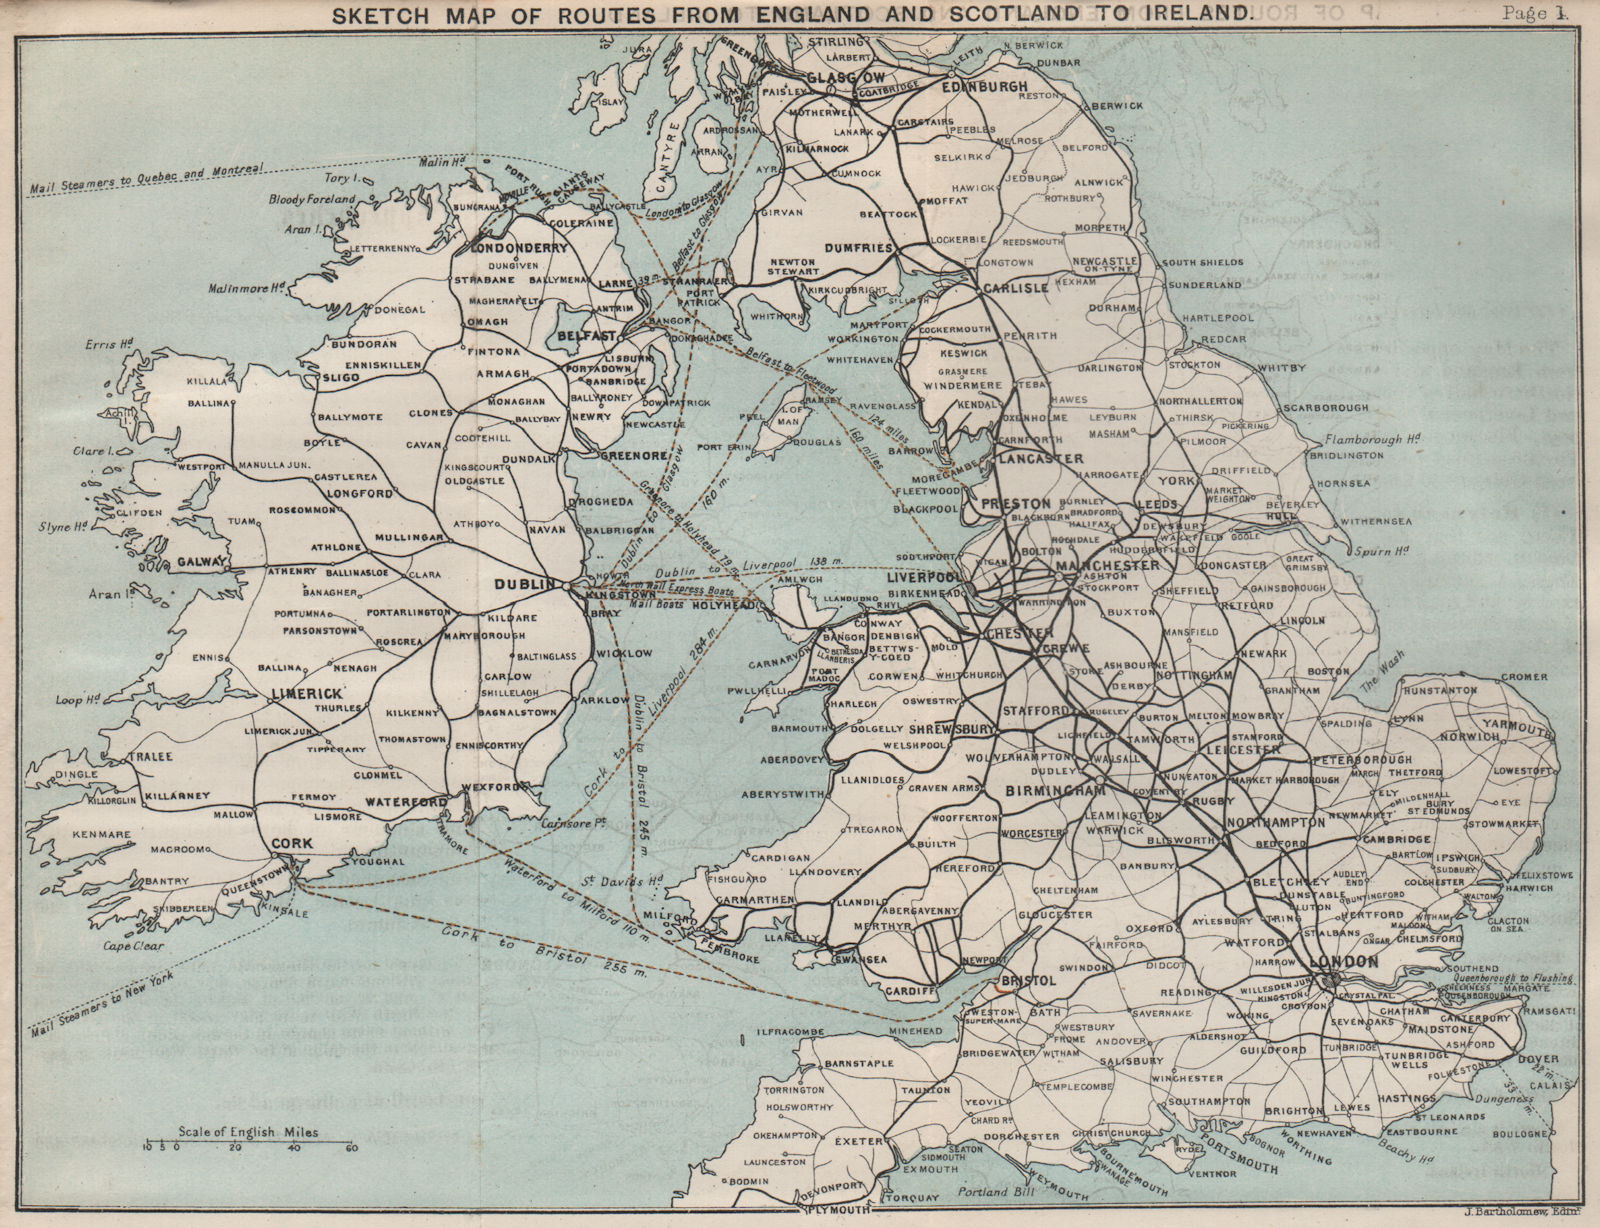 Ferry/shipping routes from England and Scotland to Ireland. BARTHOLOMEW 1887 map